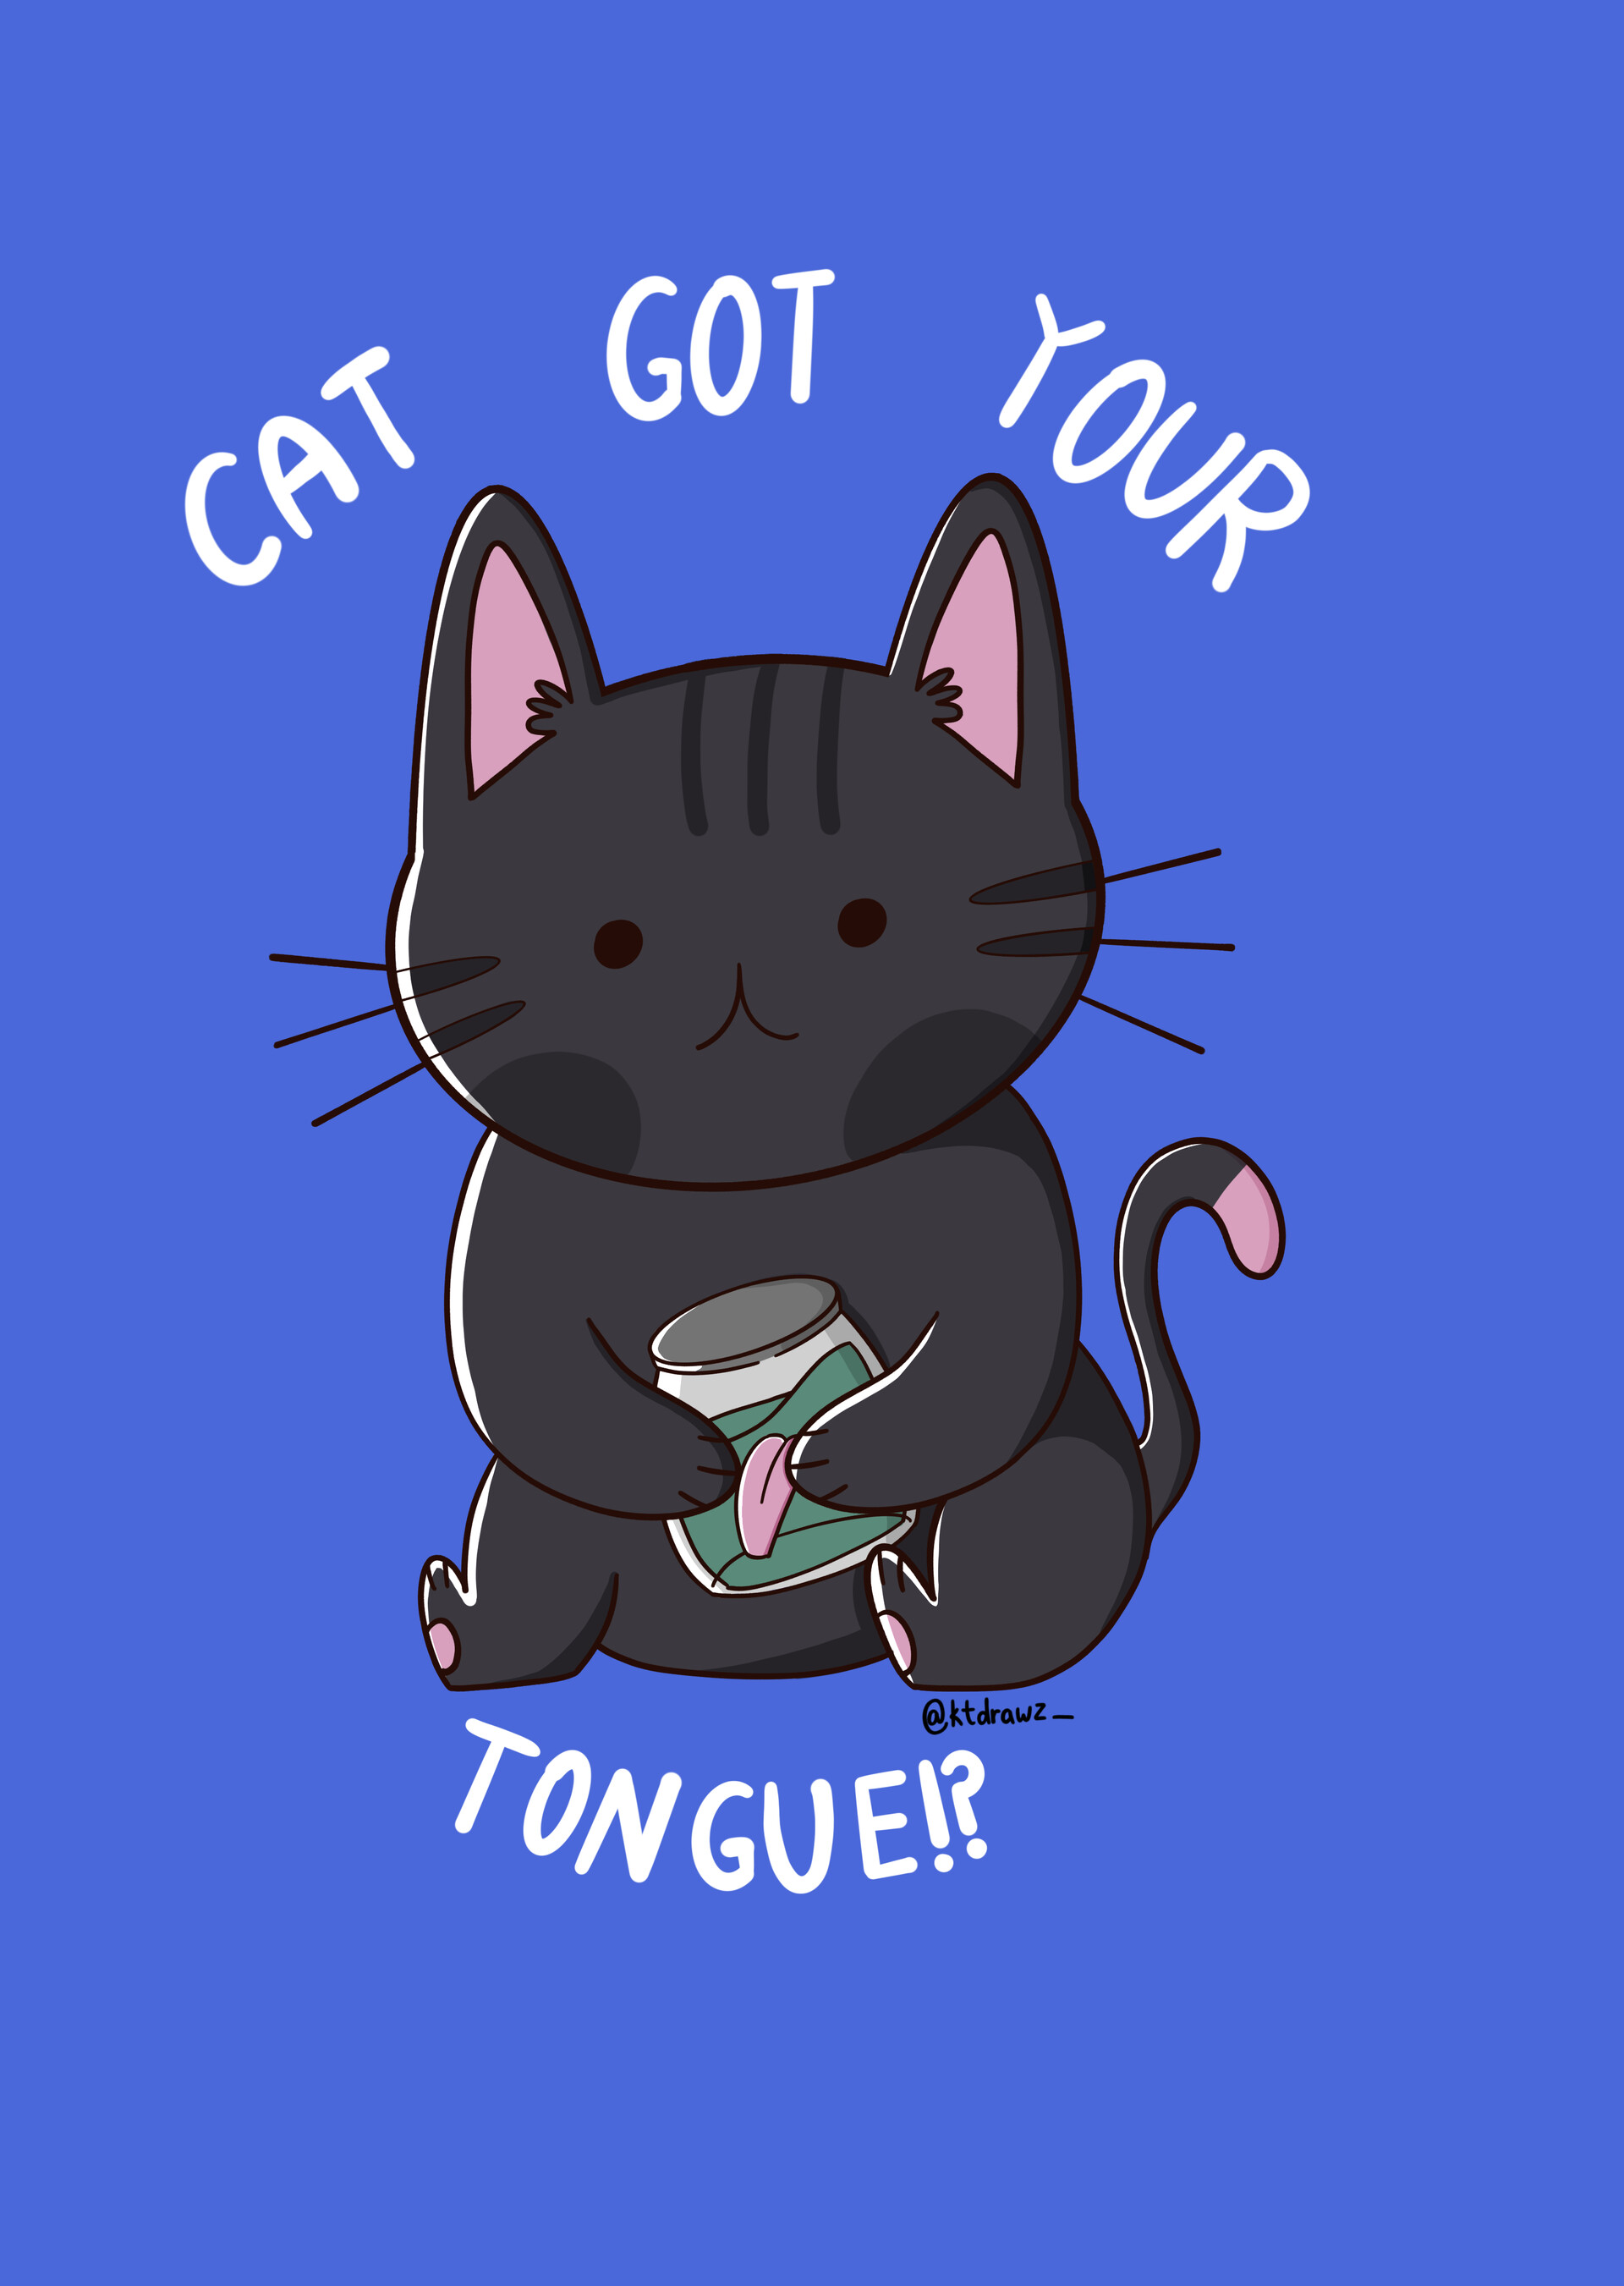 Cat got ur tongue?🐾 #therian#cattherian#fyp#foryoupage#foryou